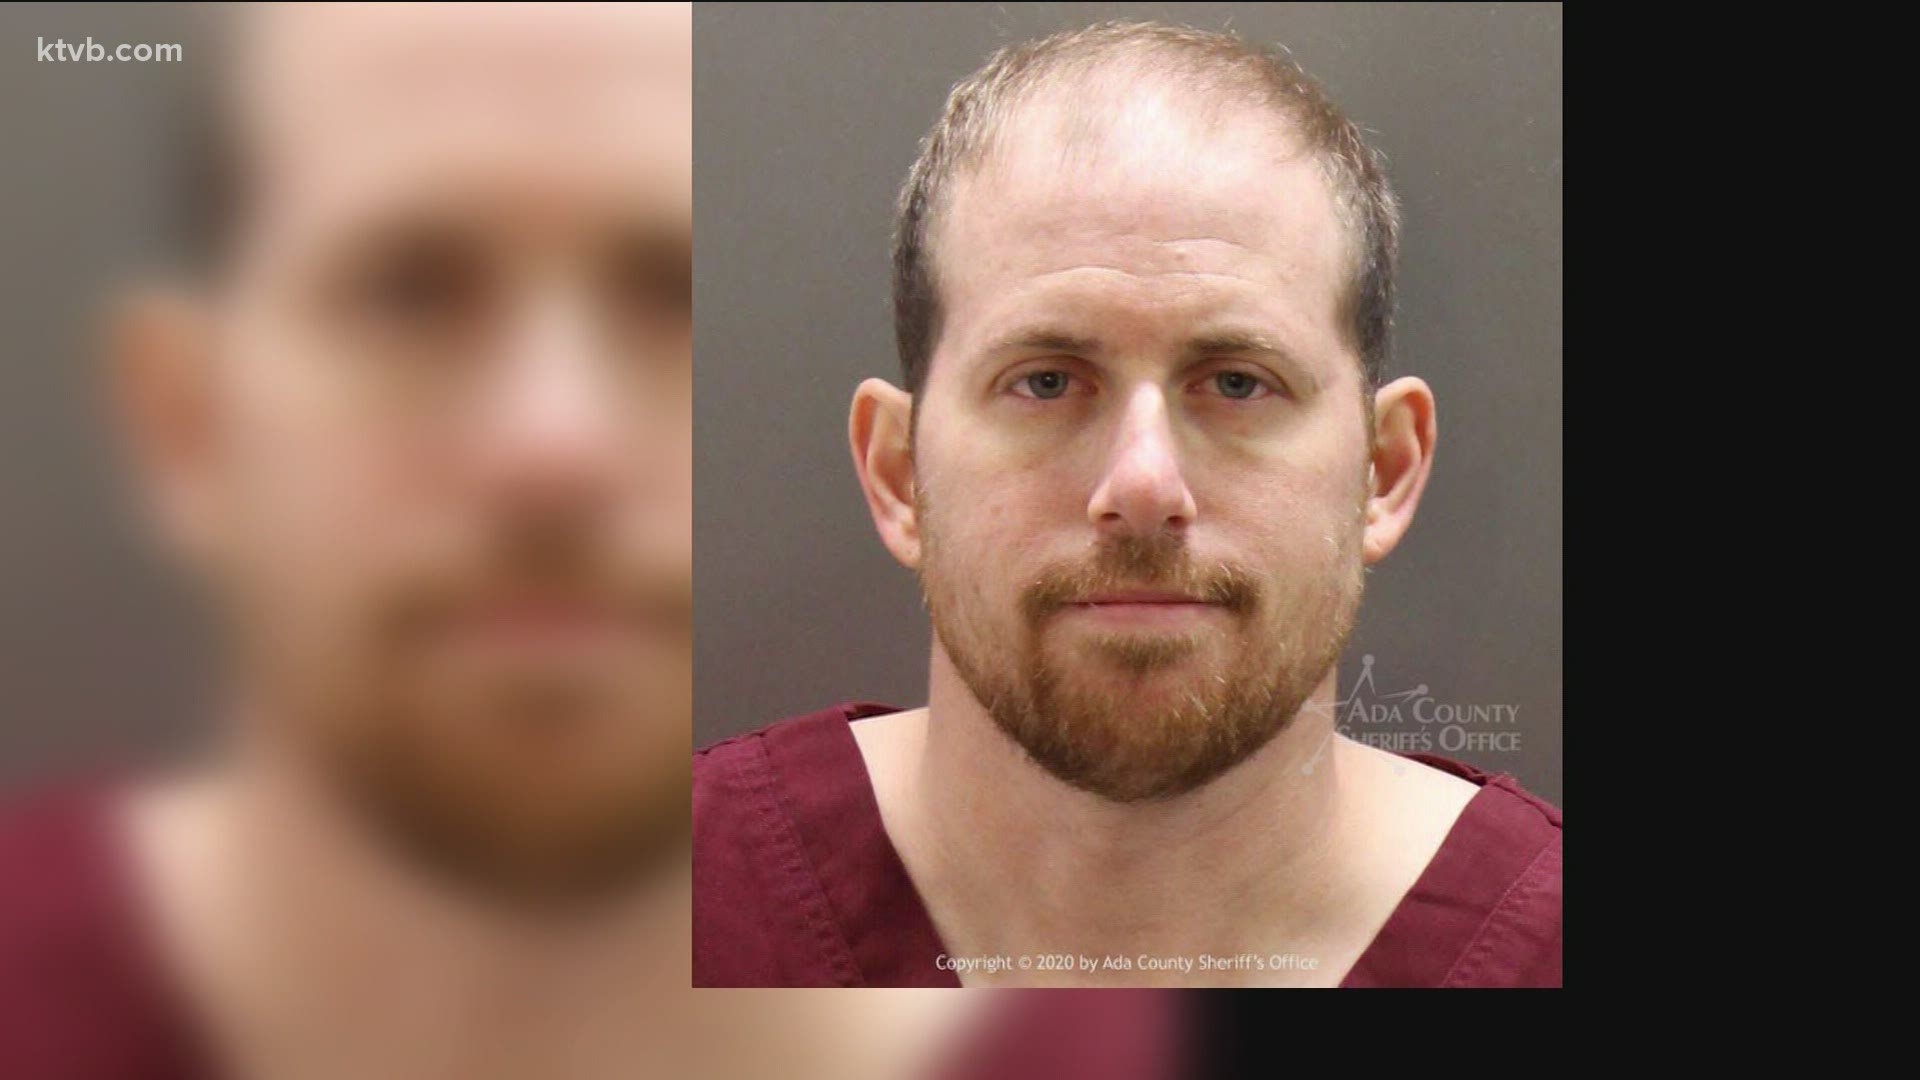 Police say Sean Hurst threatened a victim with a knife in December 2019. He must serve at least 4 years in prison before he is eligible for parole.